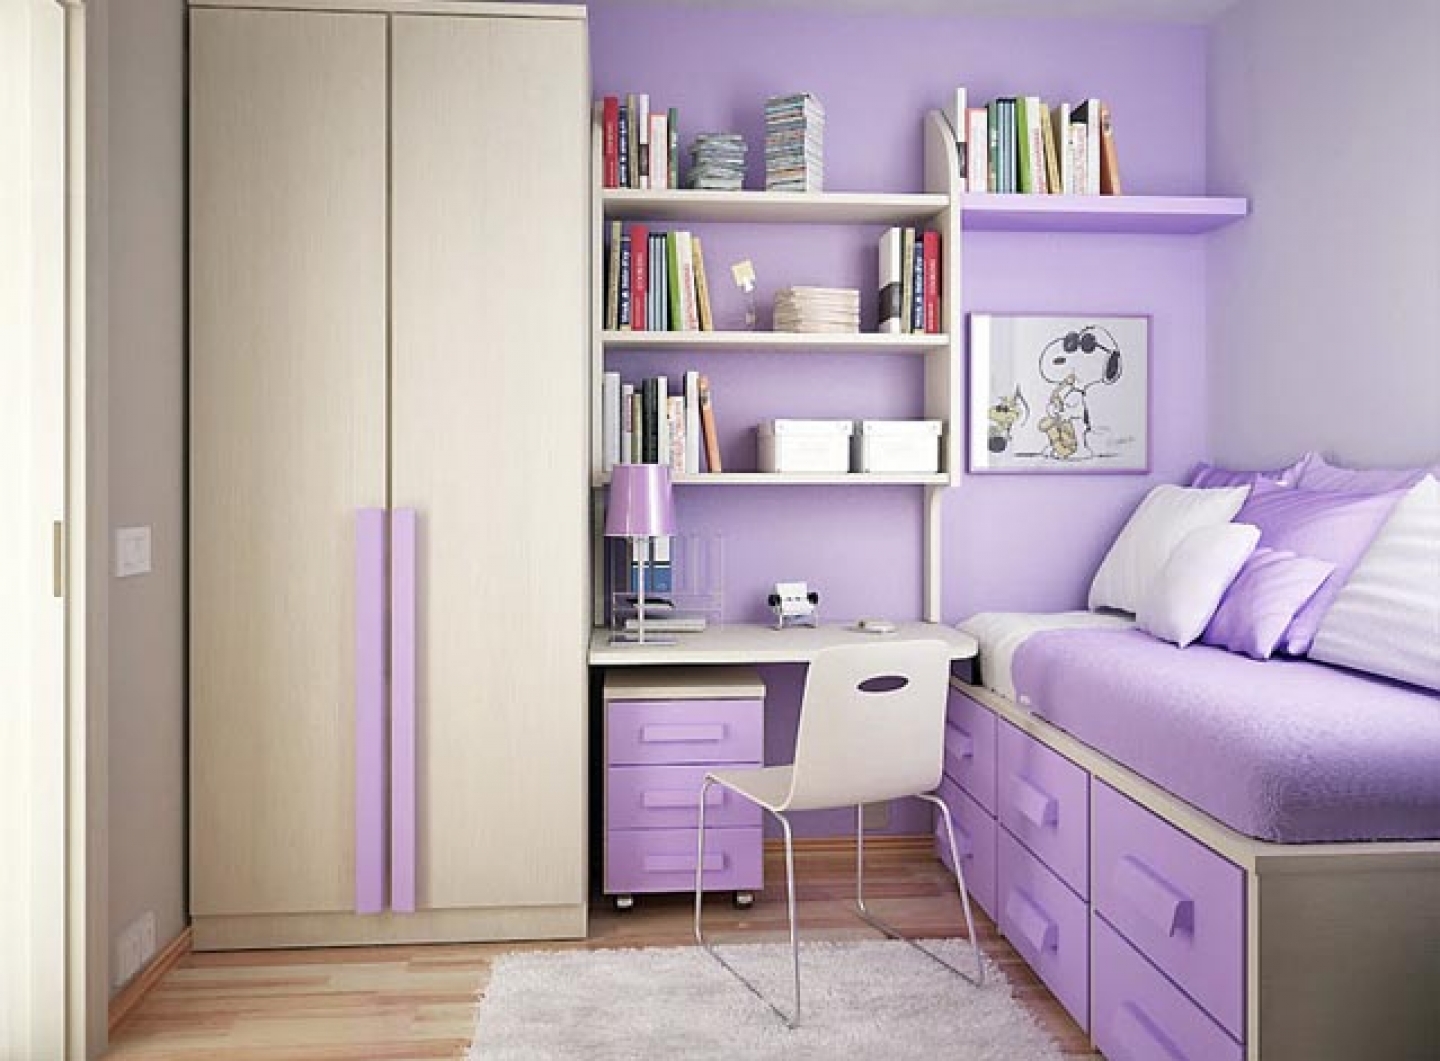 Ideas For Decorating Small Bedroom - The Interior Designs